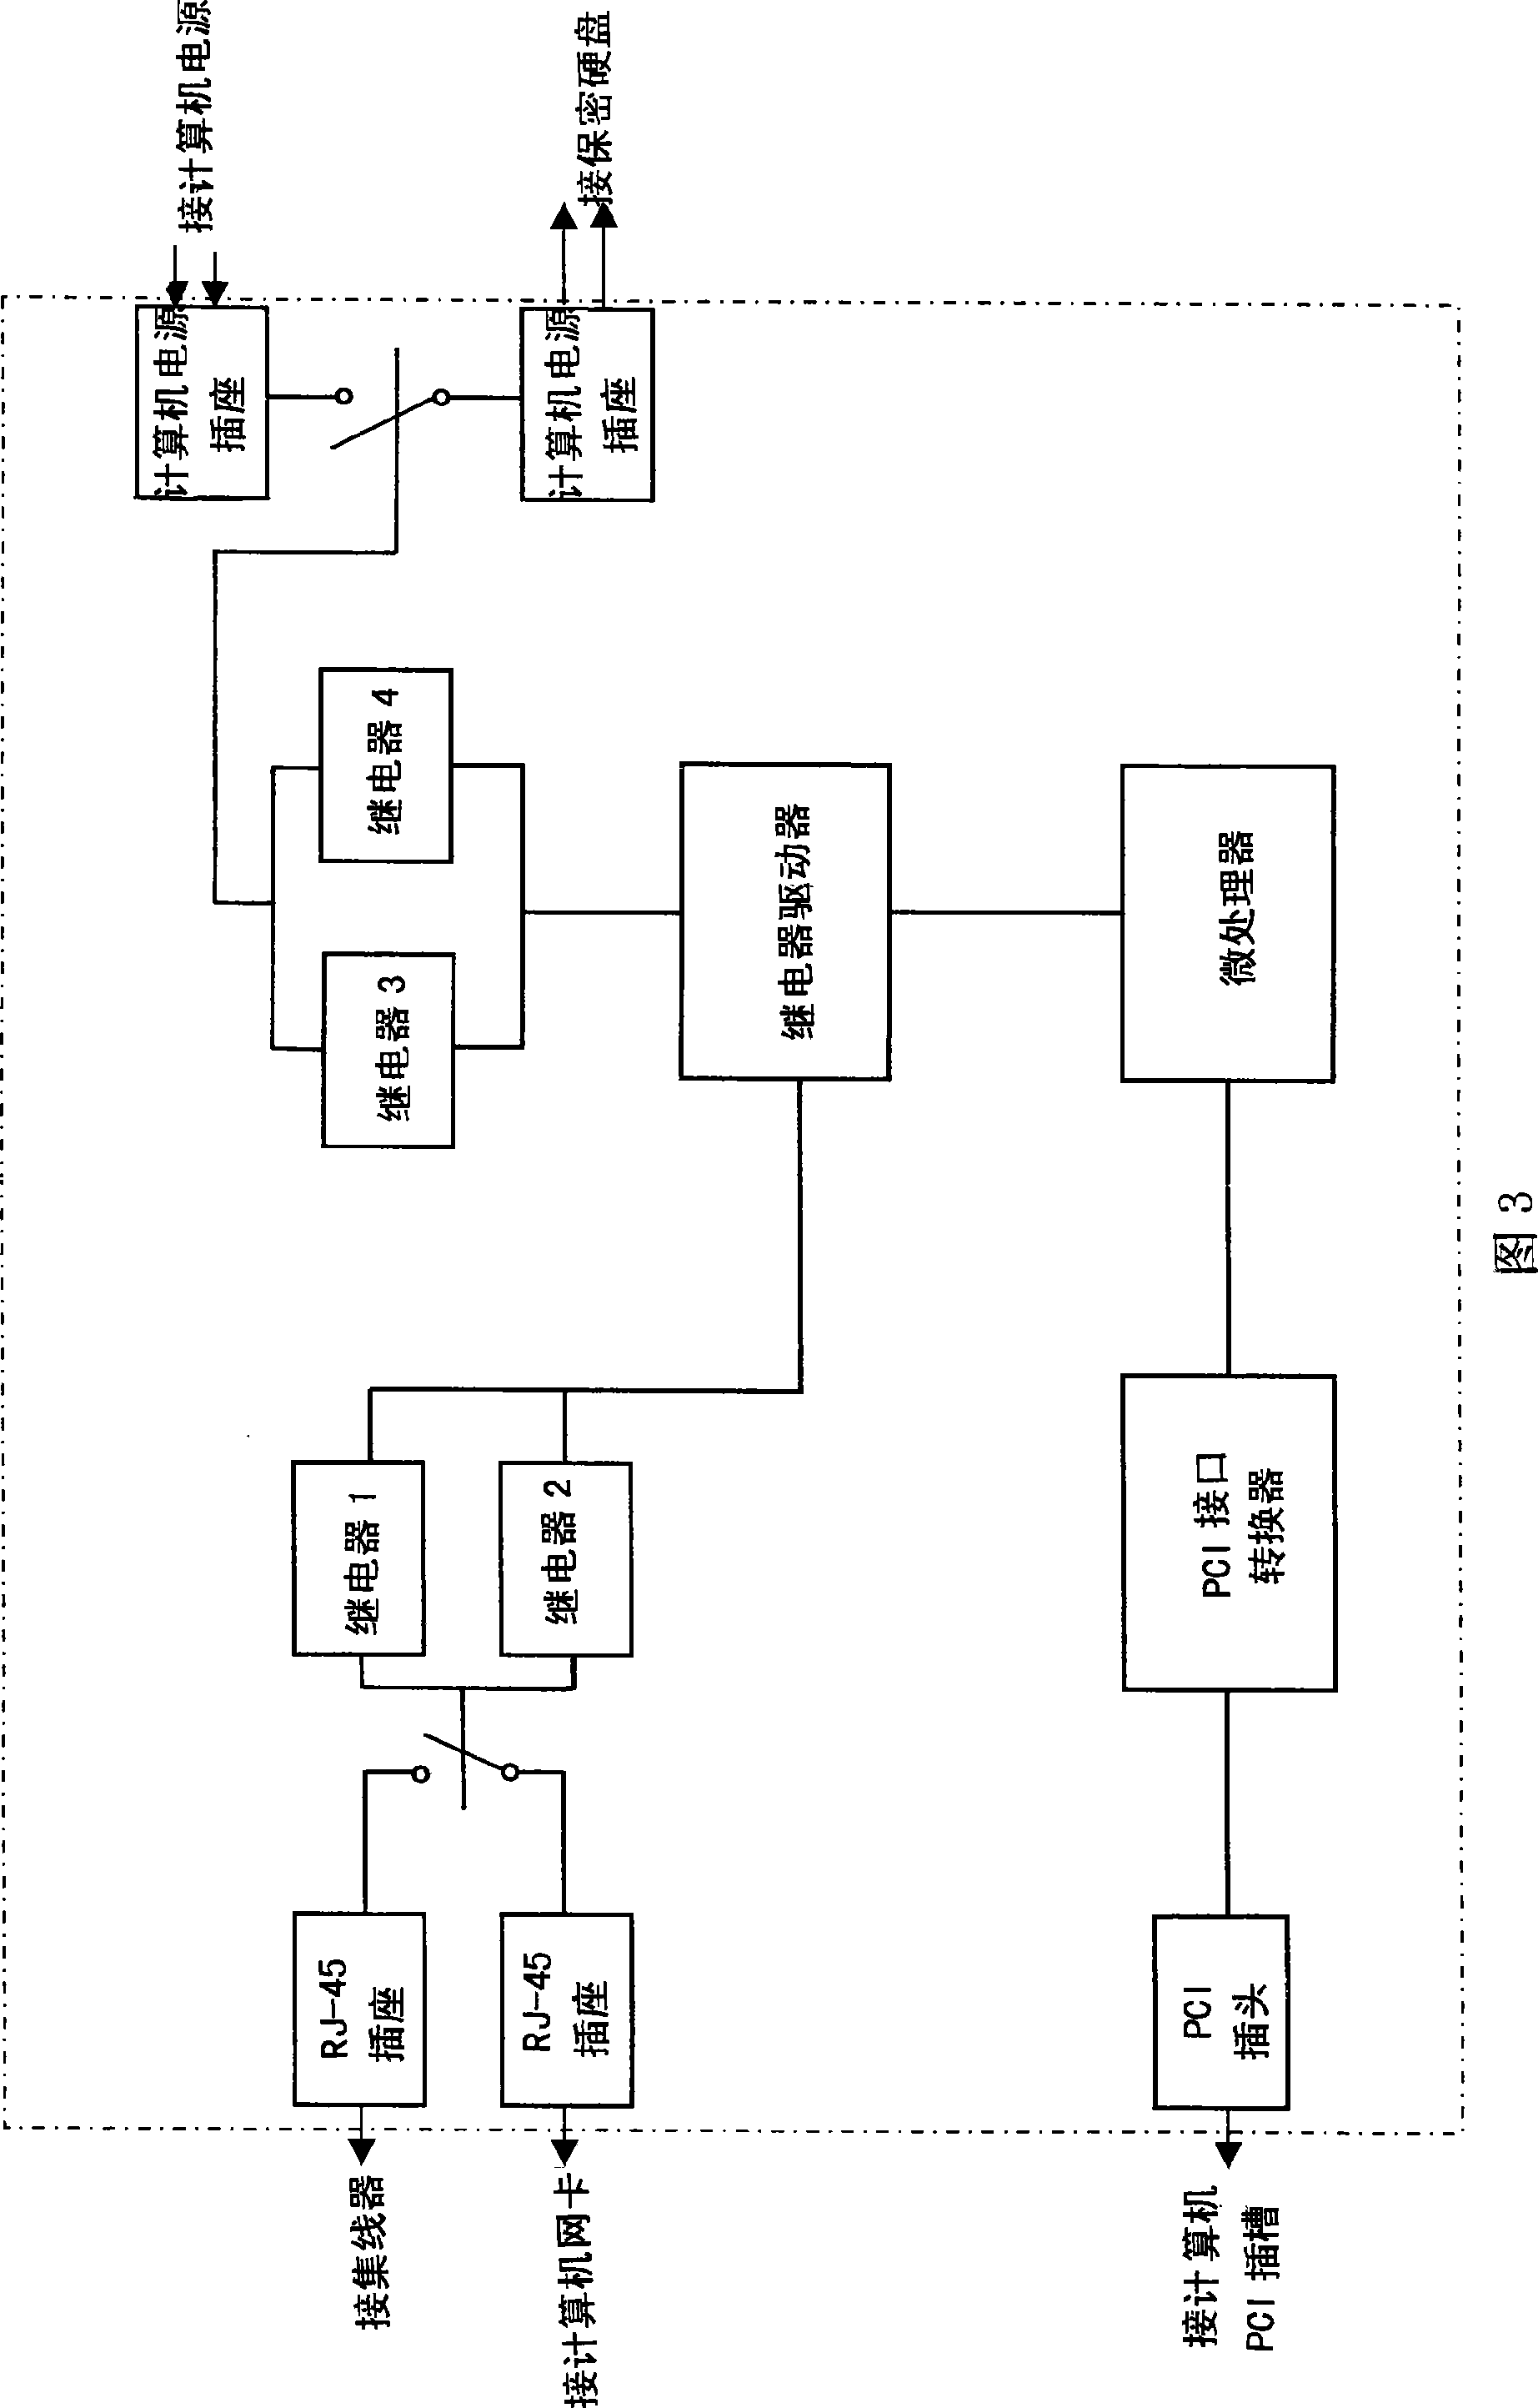 Computer information safety control system